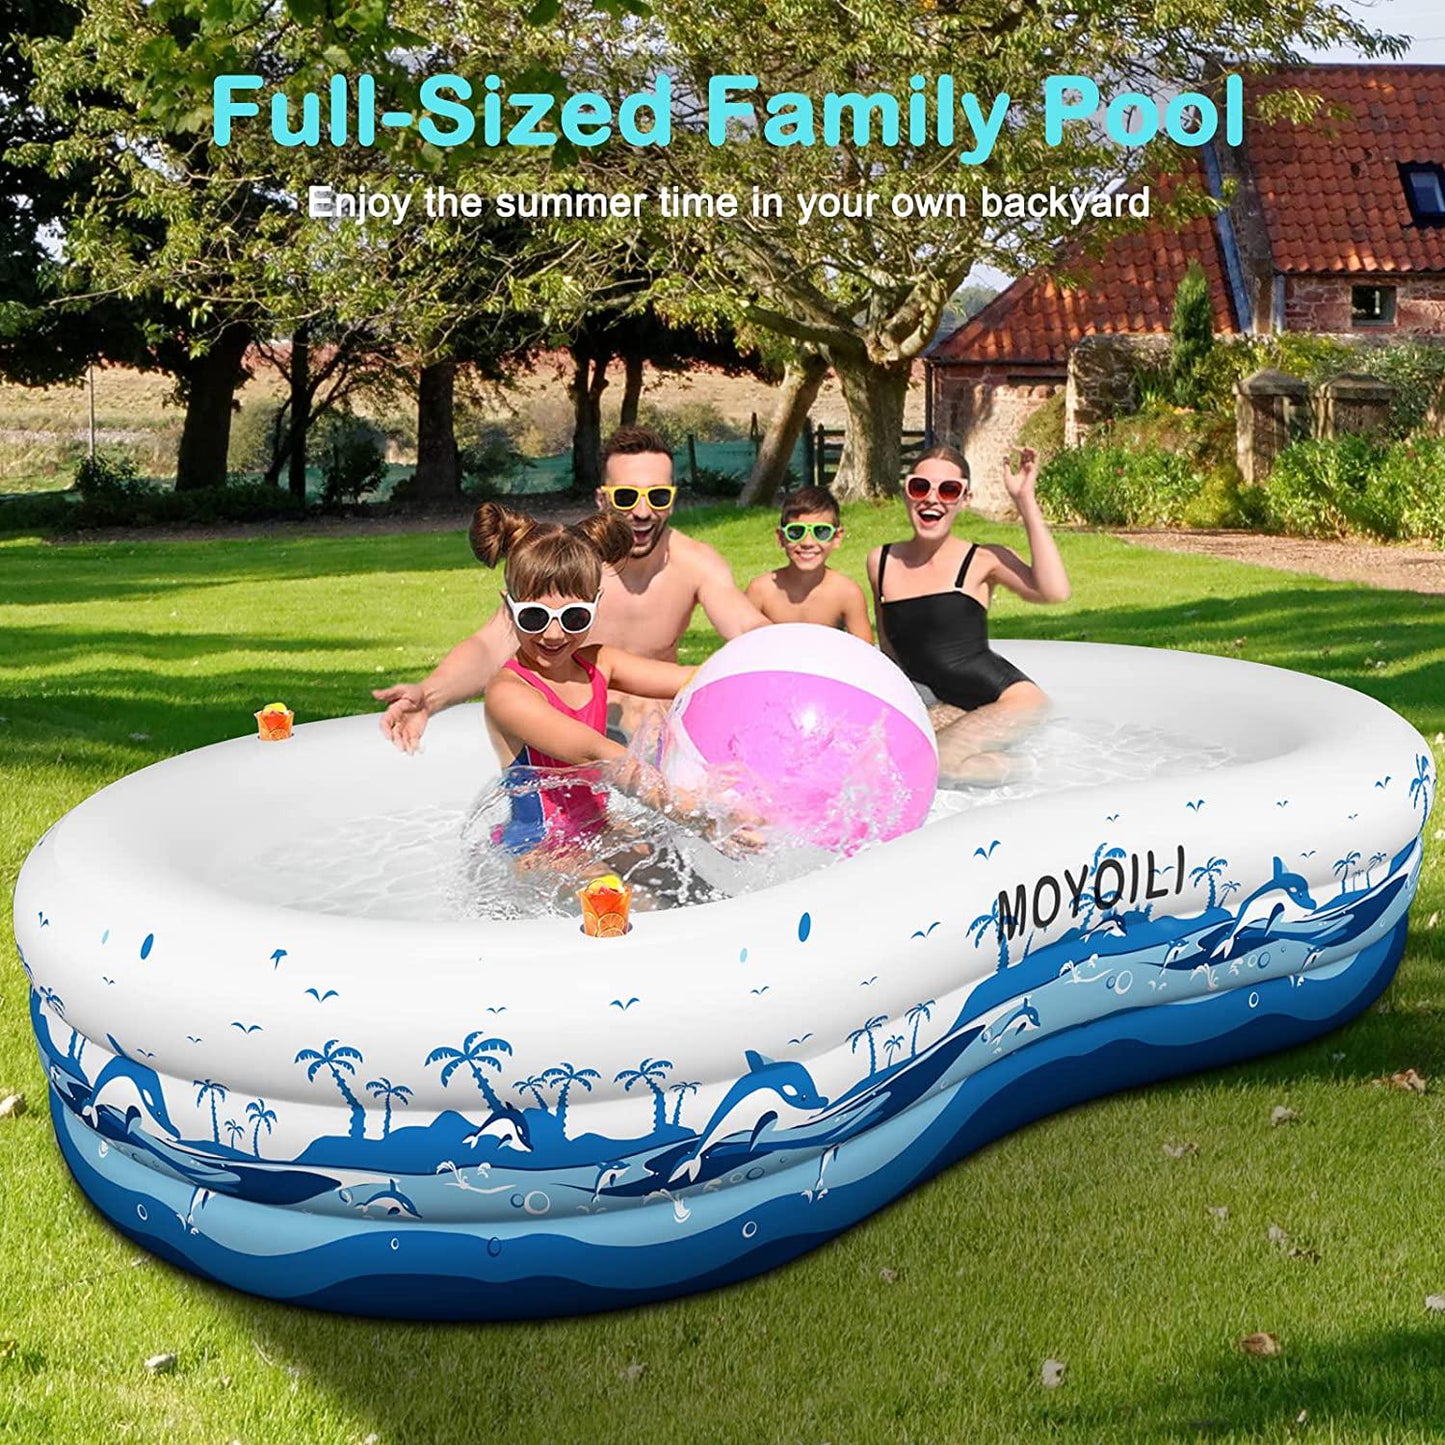 Minosoo Inflatable Pool, 130 x 72 x 22 Inflatable Pool for Adults and Kids with Seat, Drink Holder Full Sized Family Blow Up Swimming Kiddie Pool